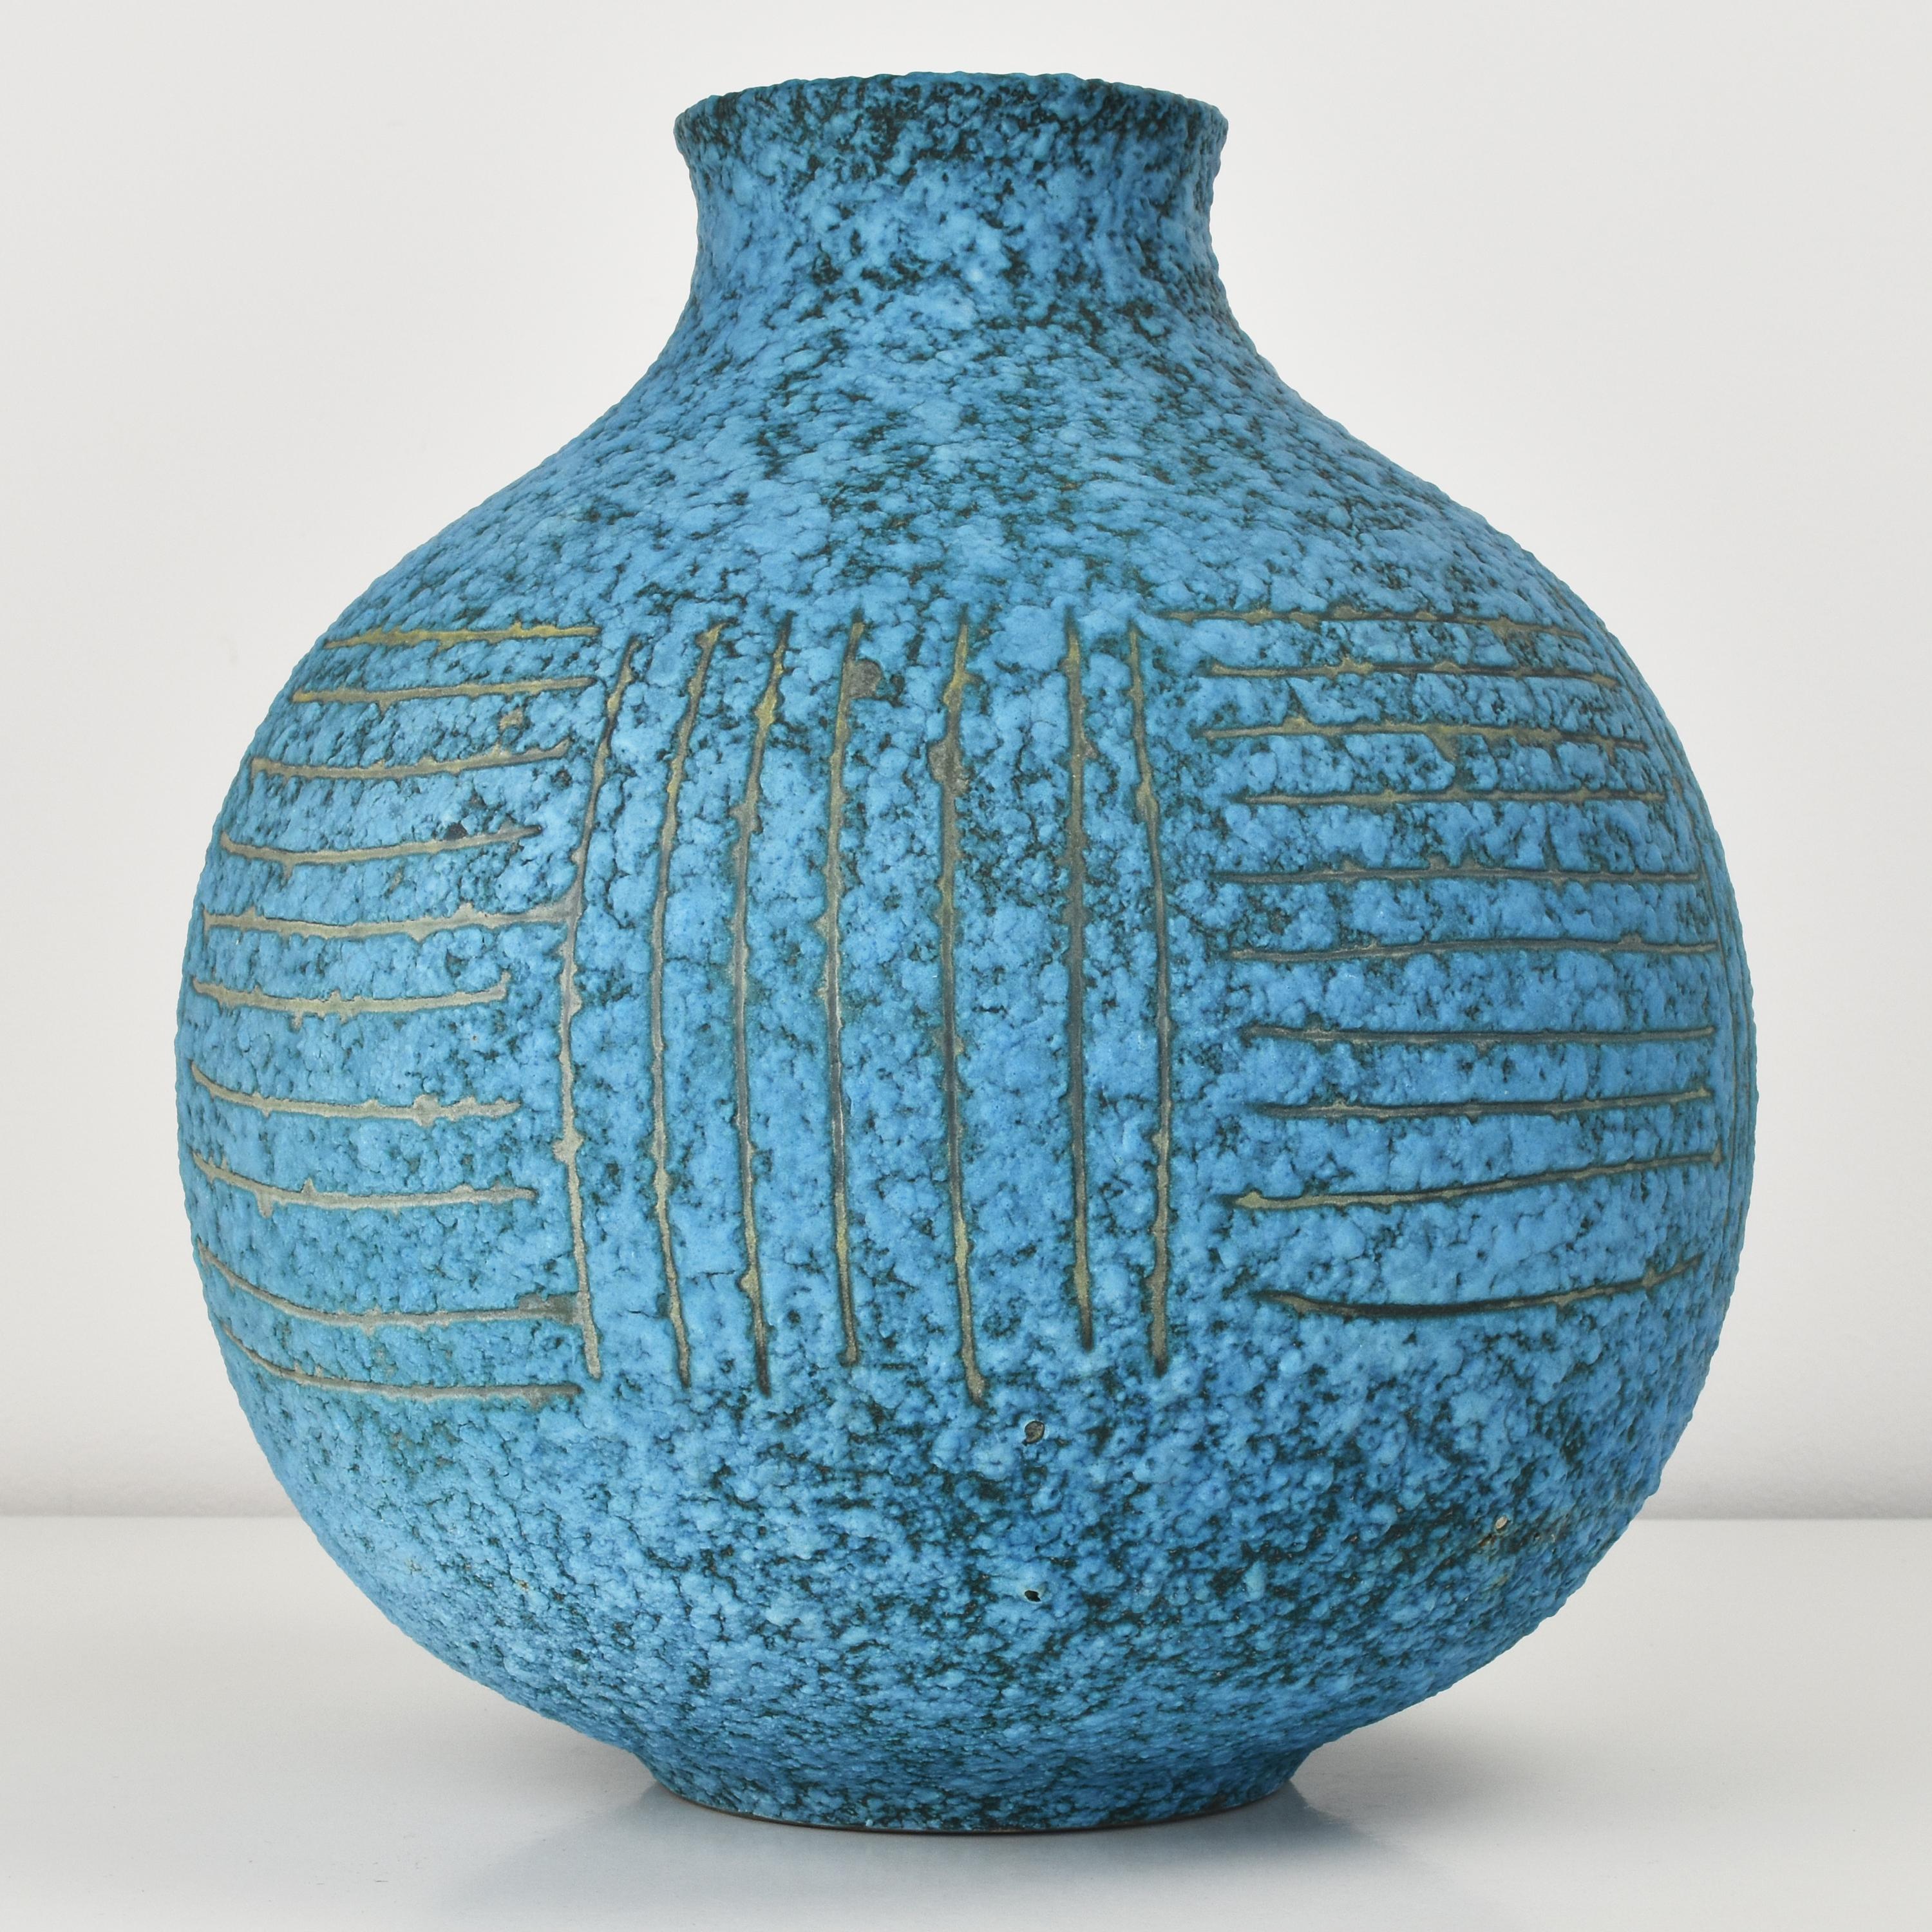 In our opinion, one of the most stunning pieces by Alvino Bagni ever. This brightly turquoise fat lava glazed pottery vase with irregular regular incised 